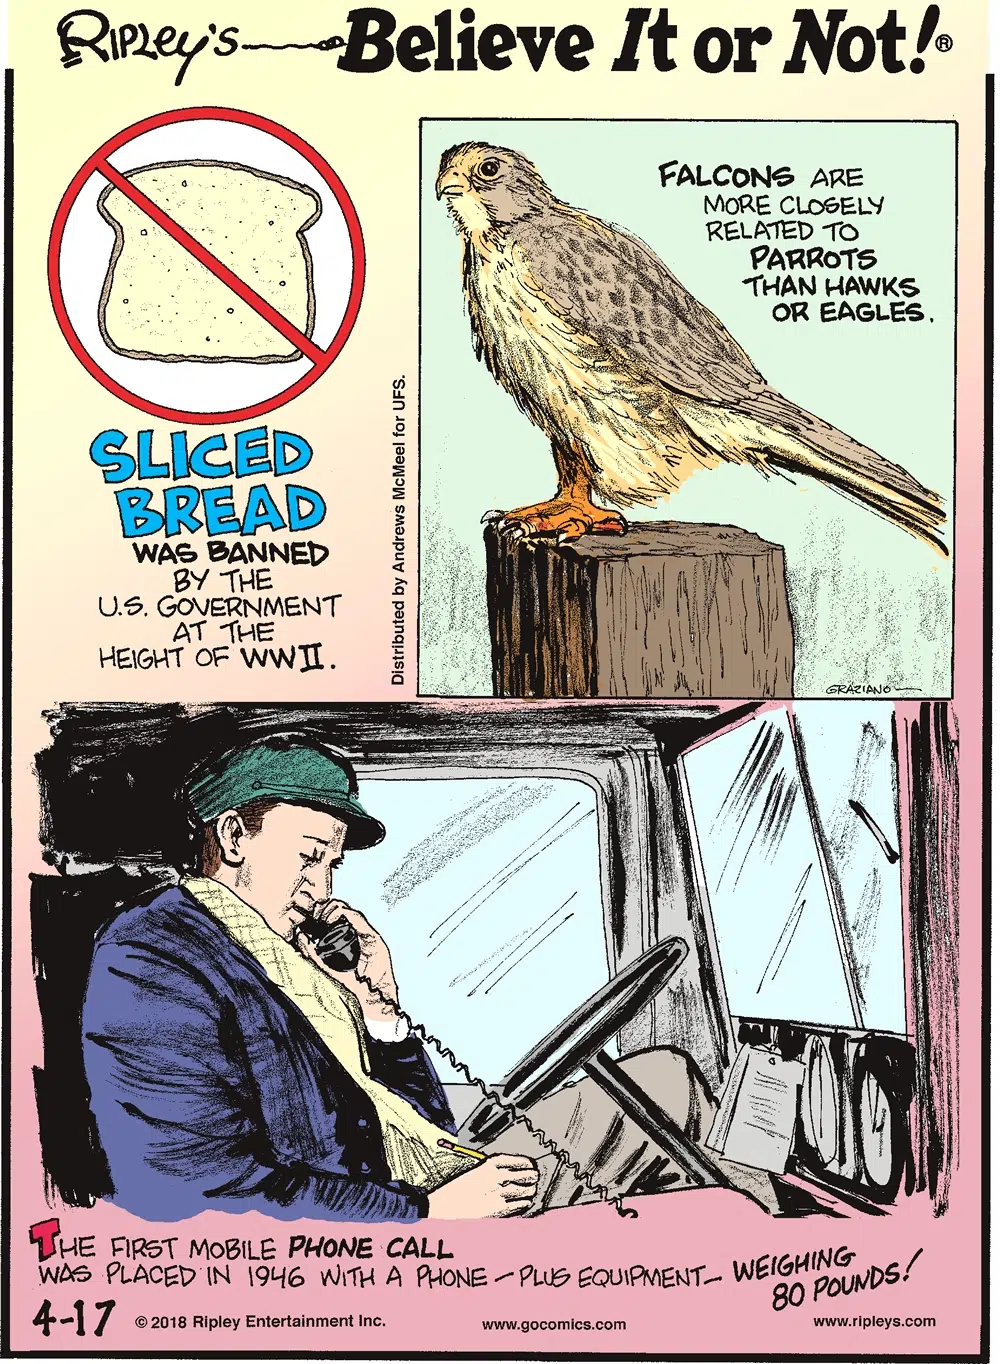 Sliced bread was banned by the U.S. Government at the height of WWII.-------------------- Falcons are more closely related to parrots than hawks or eagles.-------------------- The first mobile phone call was placed in 1946 with a phone -plus equipment- weighing 80 pounds!